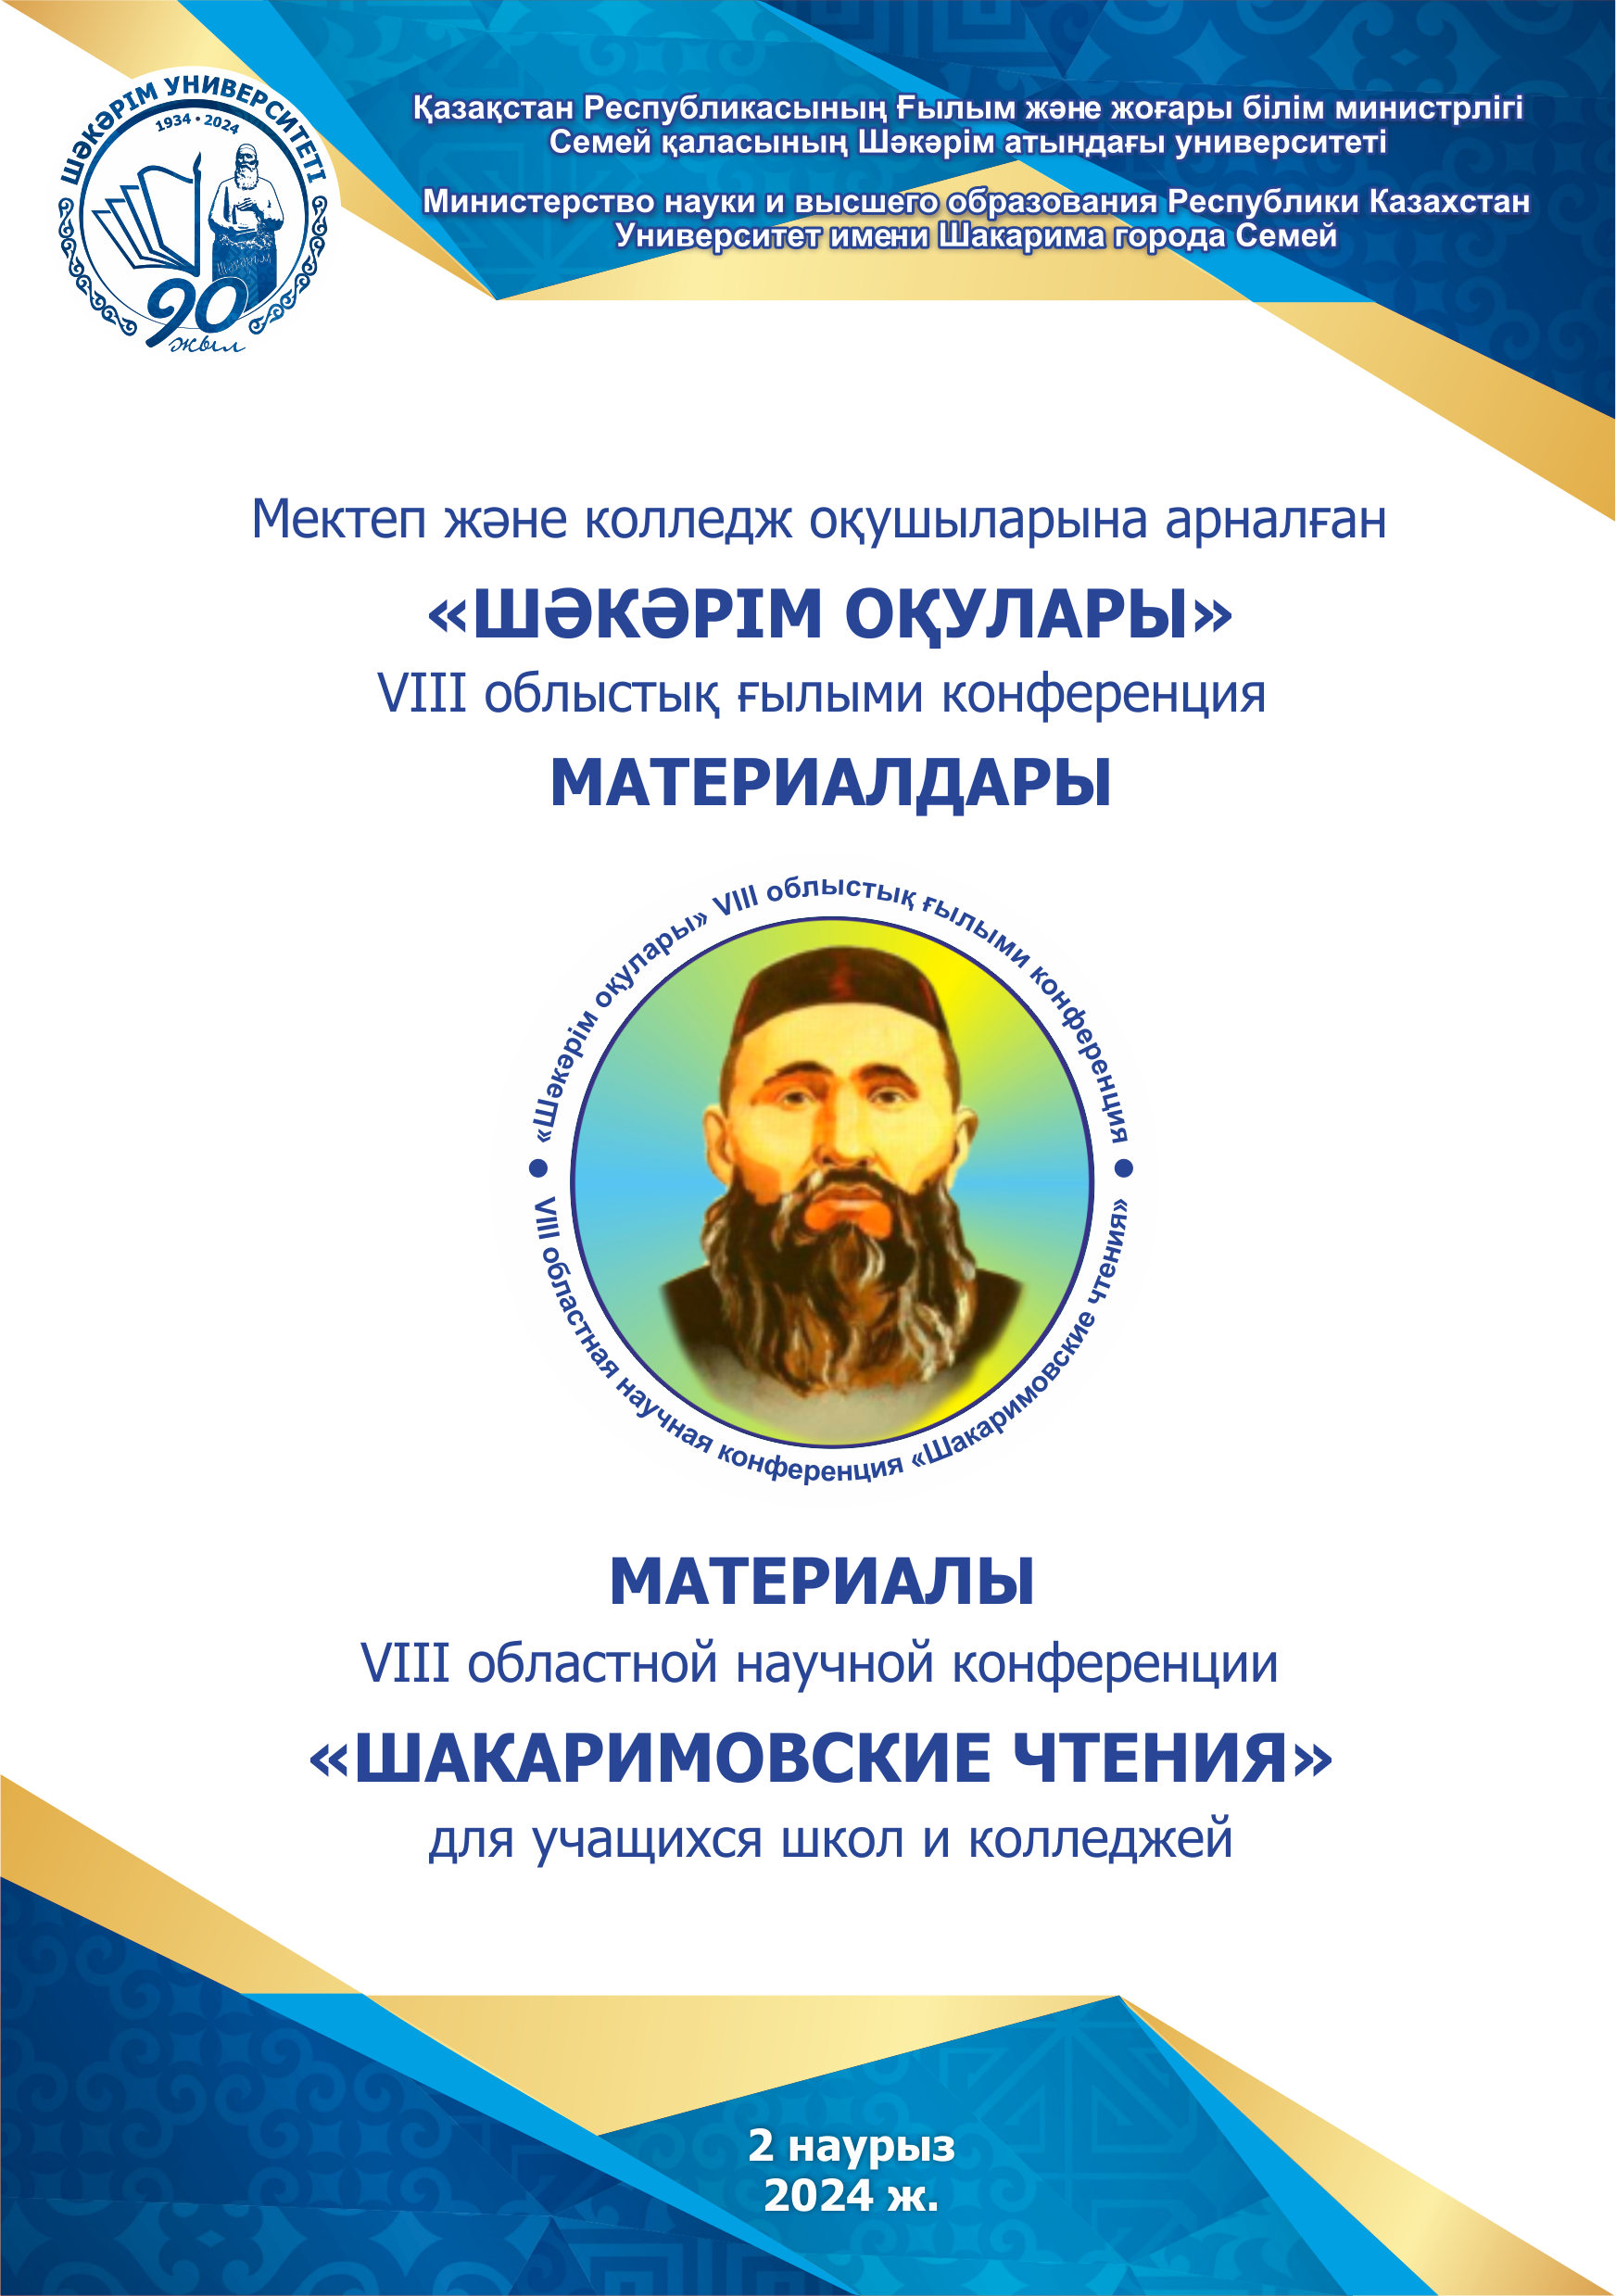 Materials of the VIII regional scientific conference «Shakarim Readings» for school and college students